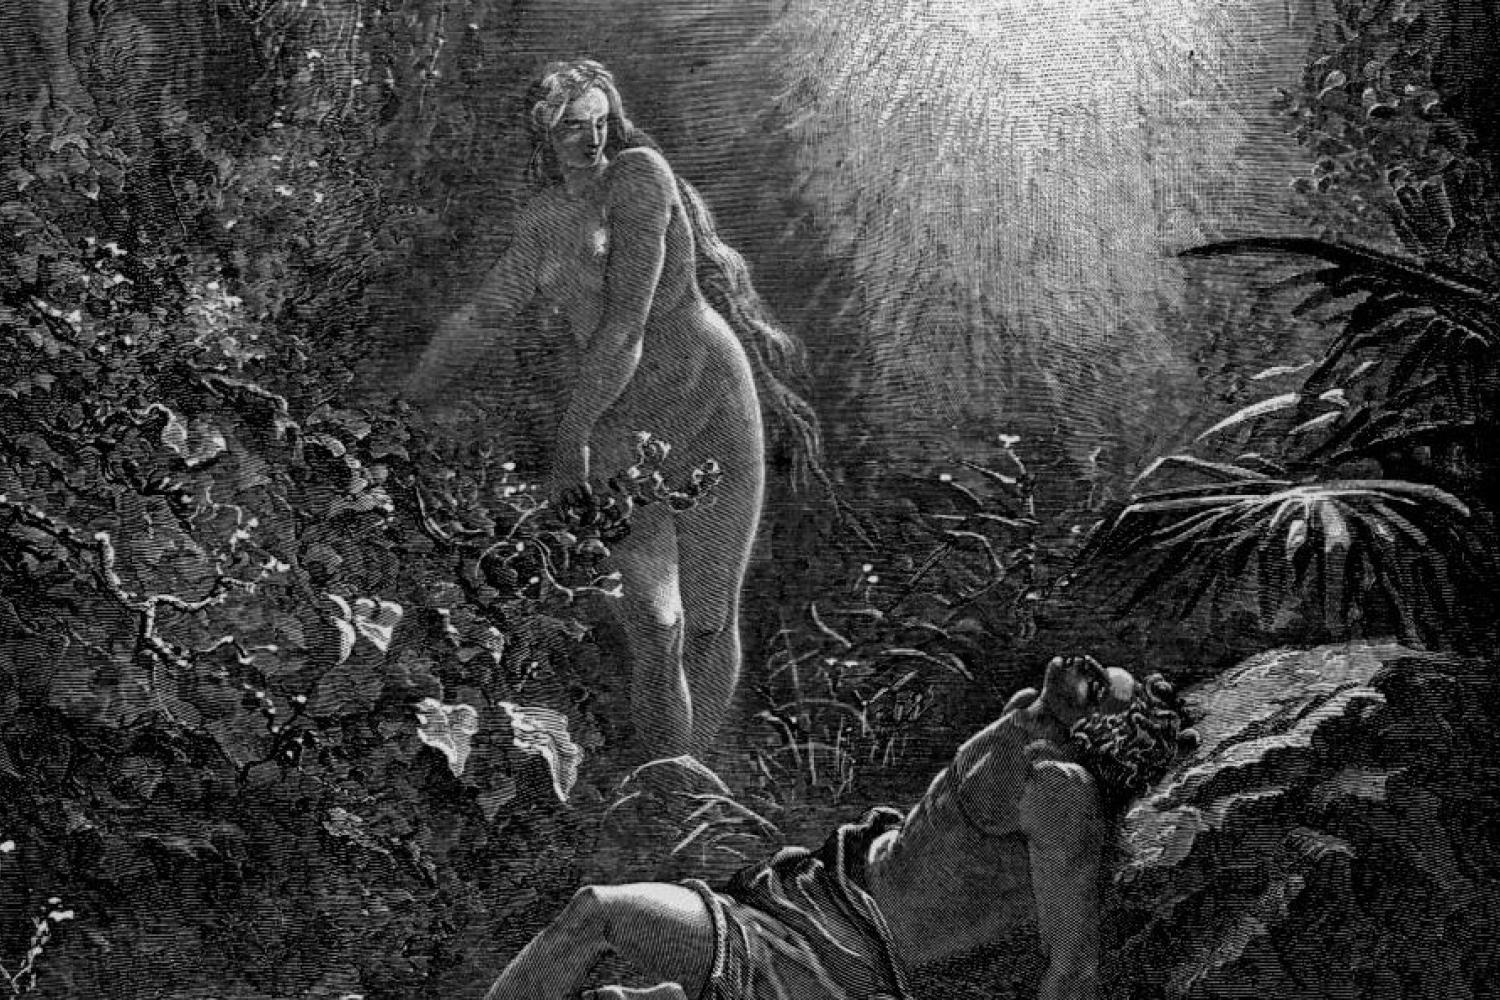 "The Formation of Eve," by Gustave Dore